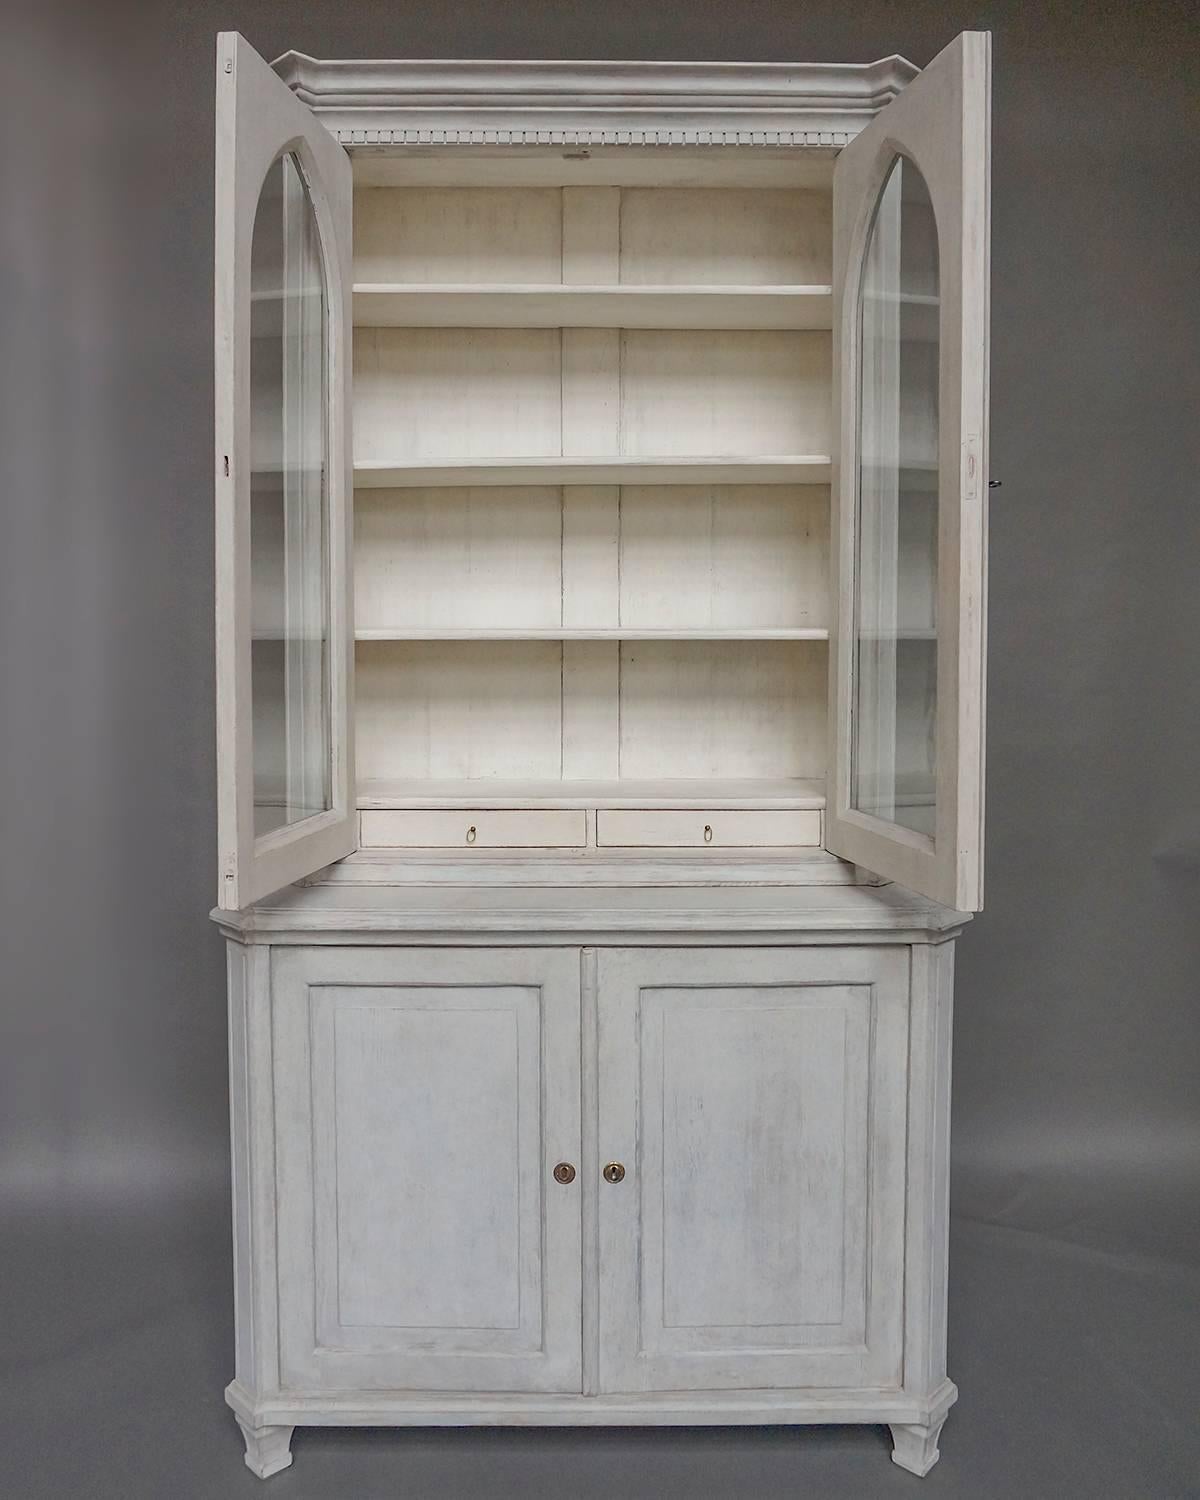 Cabinet in two parts, Sweden, circa 1870. The upper section has double doors with Gothic arched windows which retain their original glass. At the top is a bold cornice with dentil detail. The lower section has two panelled doors concealing a large